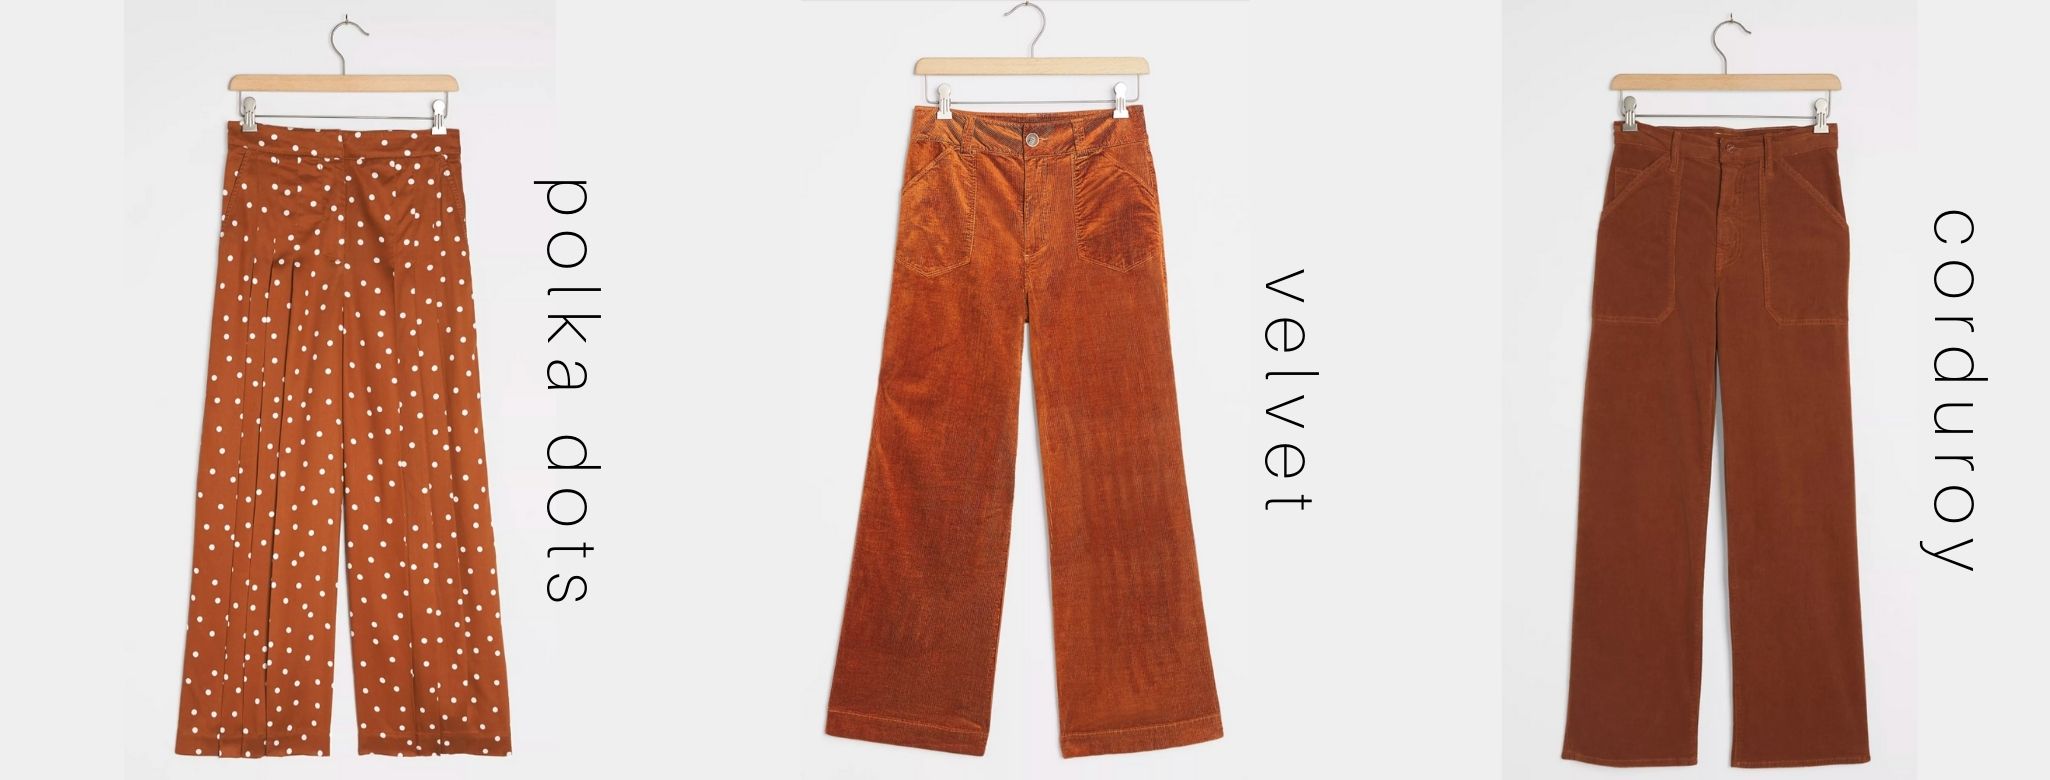 3 New Burnt Orange Pants You Need To Launch Your Fall 2020